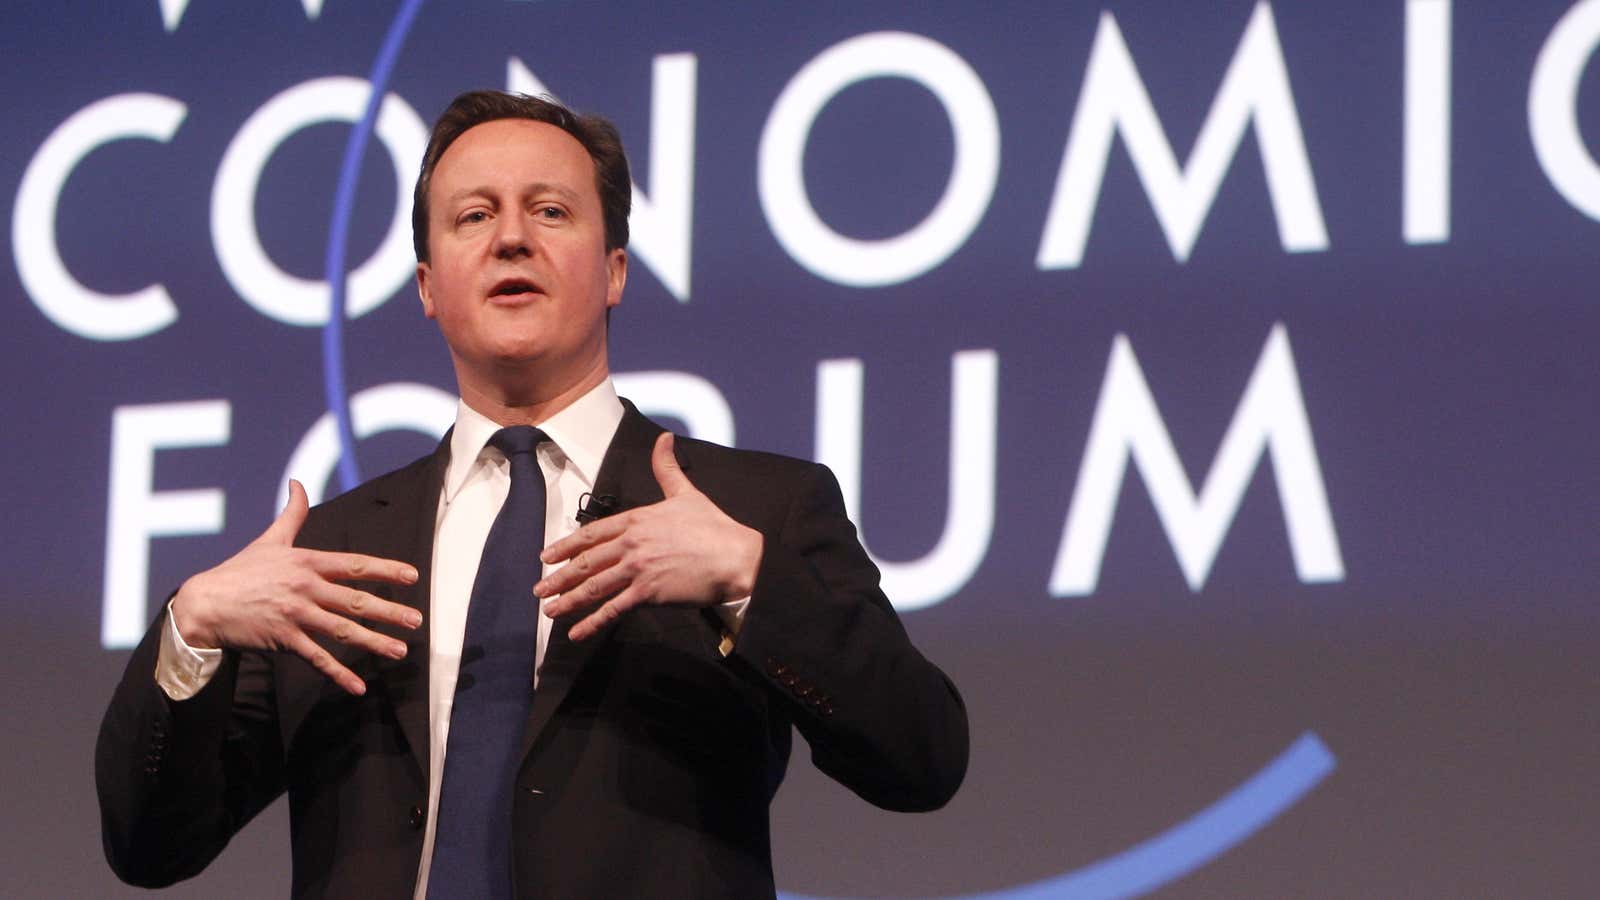 The referendum on the EU might not even be held, but UK Prime Minister David Cameron could inspire an overhaul anyway.